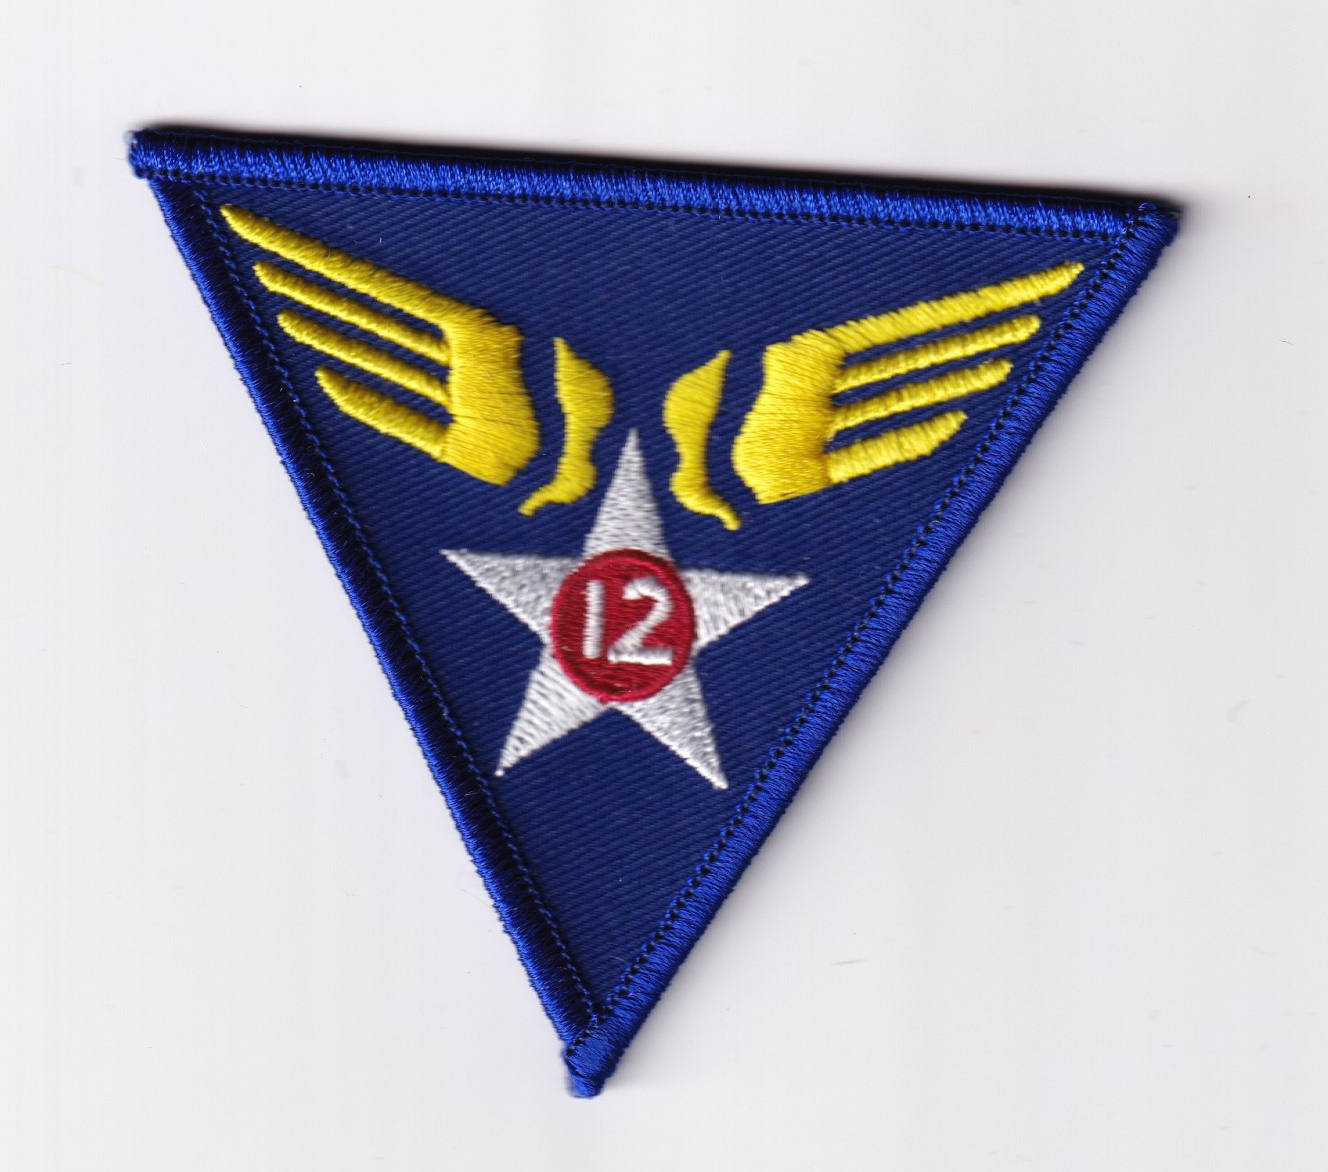 12th Air Force Patch